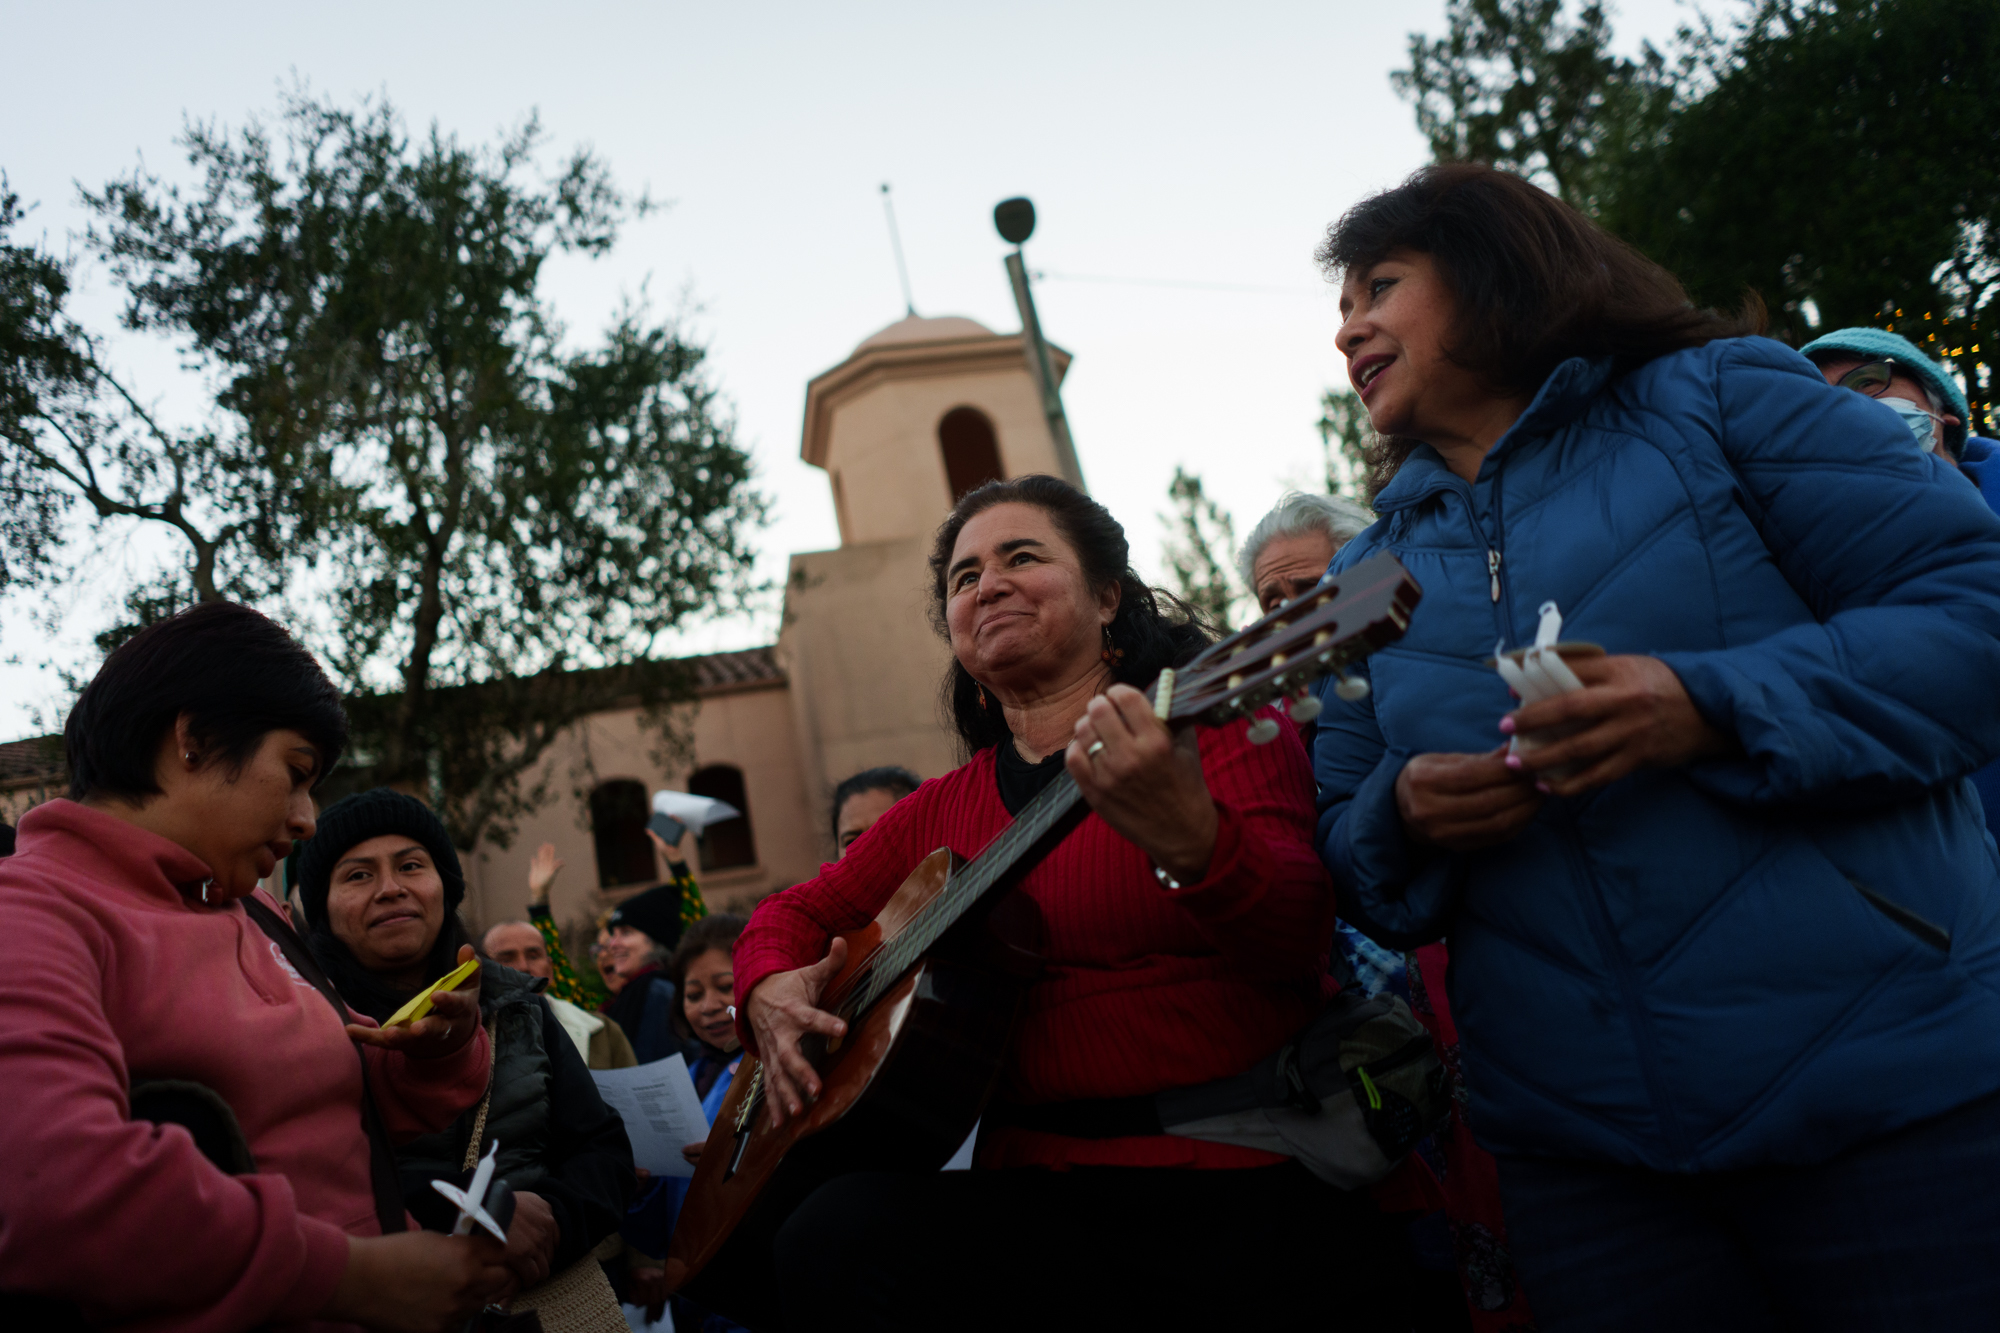 A woman plays guitar while standing outside among a crowd of demonstrators.